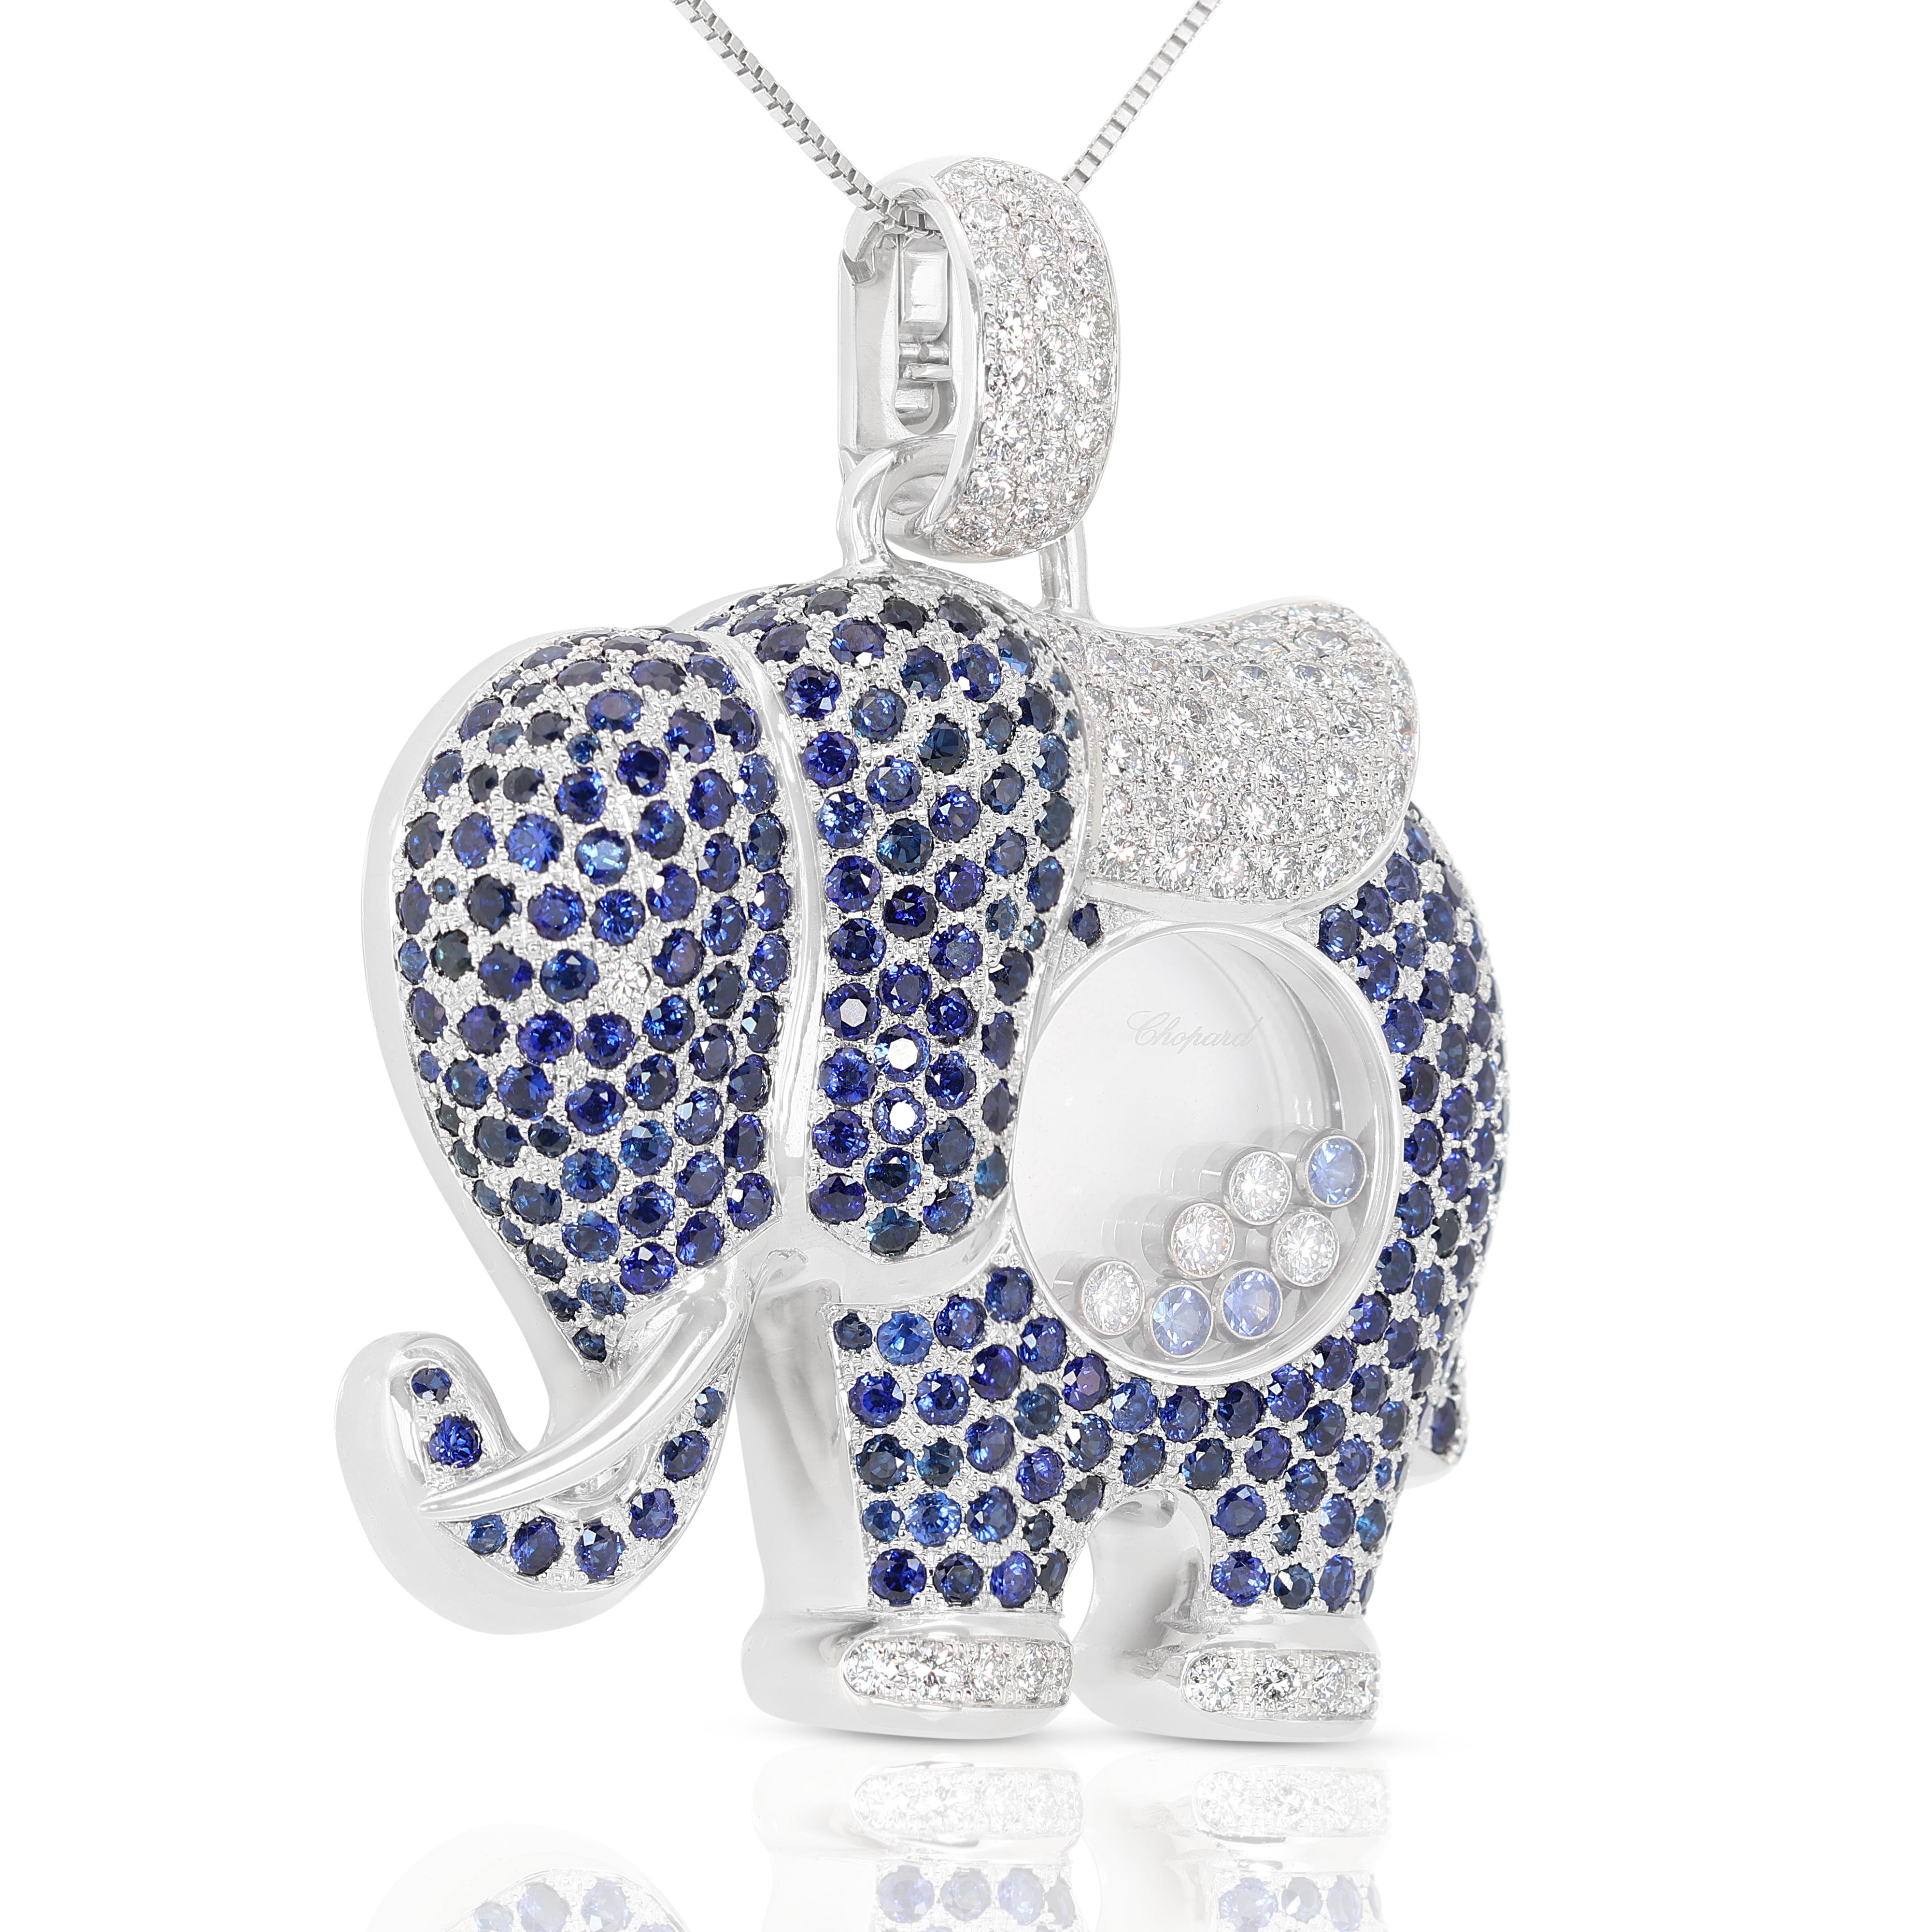 At the heart of this exquisite pendant lies a breathtaking array of 266 round brilliant sapphire stones, totaling 5.32 carats. Each sapphire boasts a mesmerizing blue hue, exuding timeless beauty and charm. Surrounding the captivating sapphire